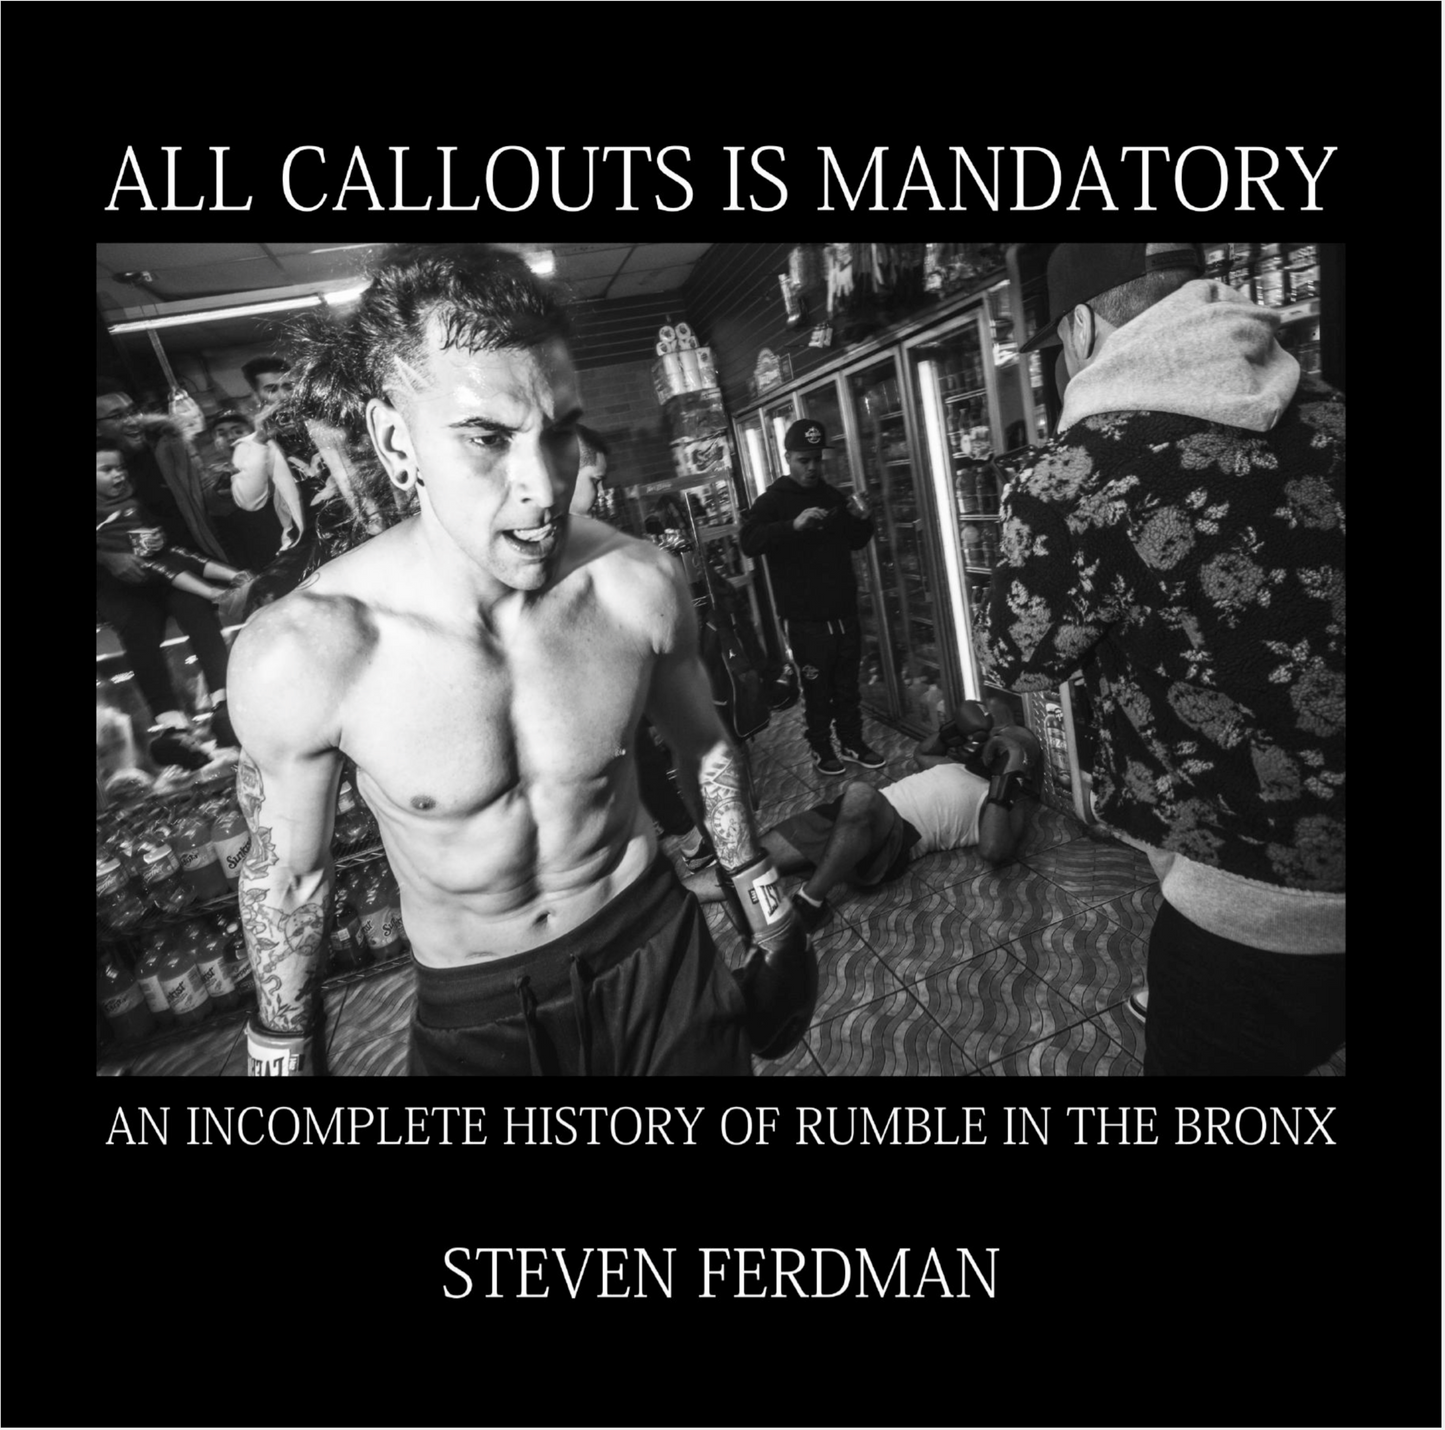 All Callouts is Mandatory - An Incomplete History of Rumble in the Bronx